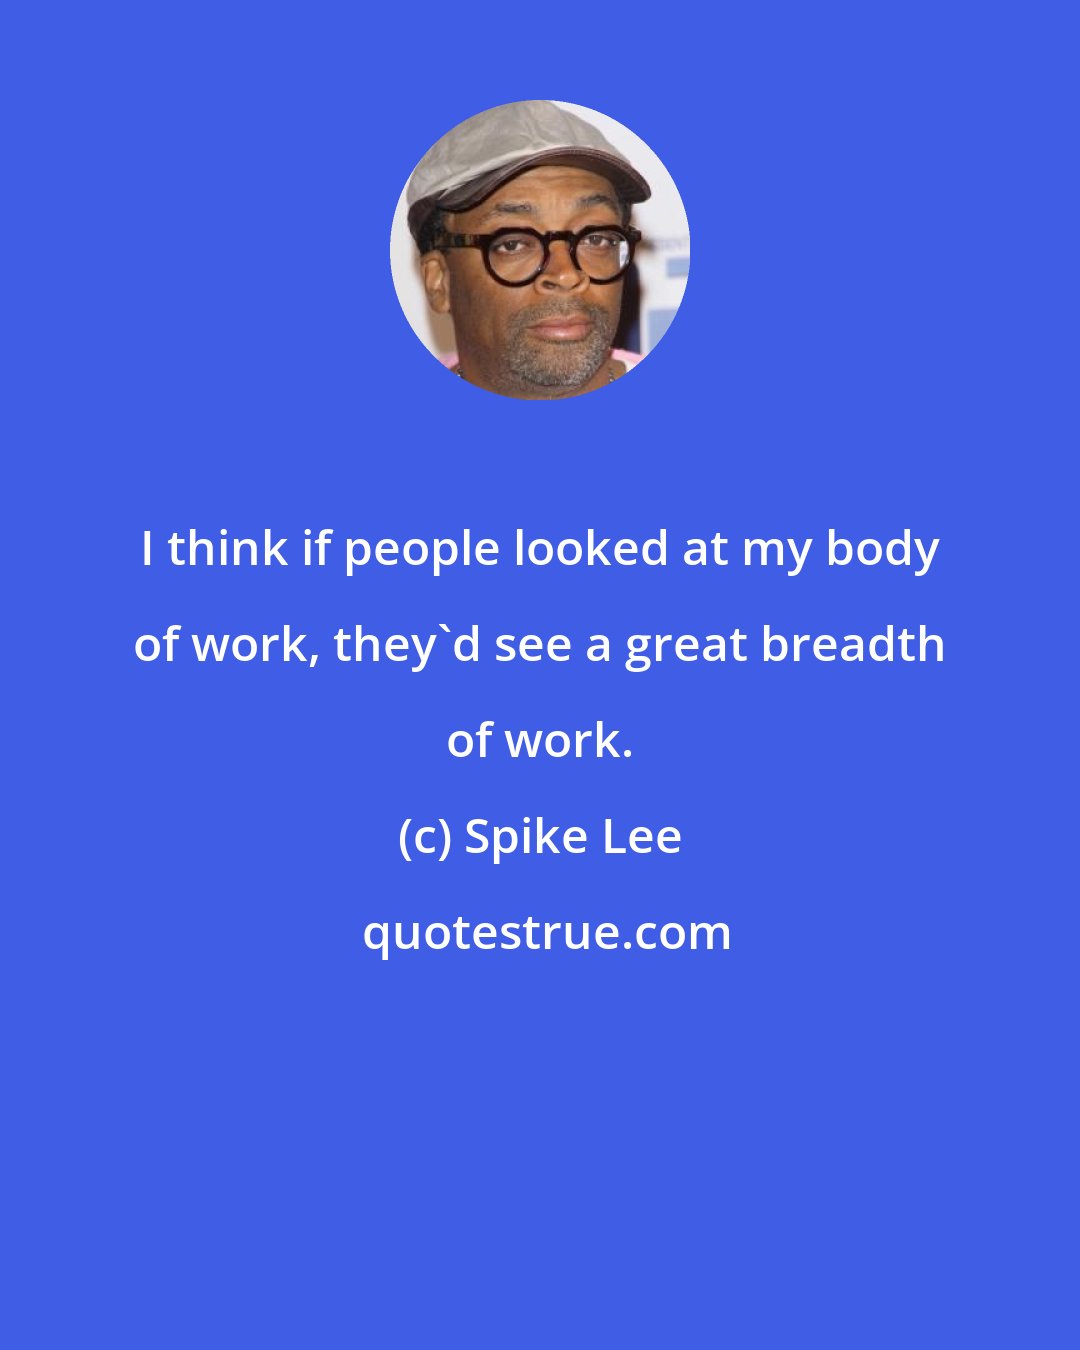 Spike Lee: I think if people looked at my body of work, they'd see a great breadth of work.